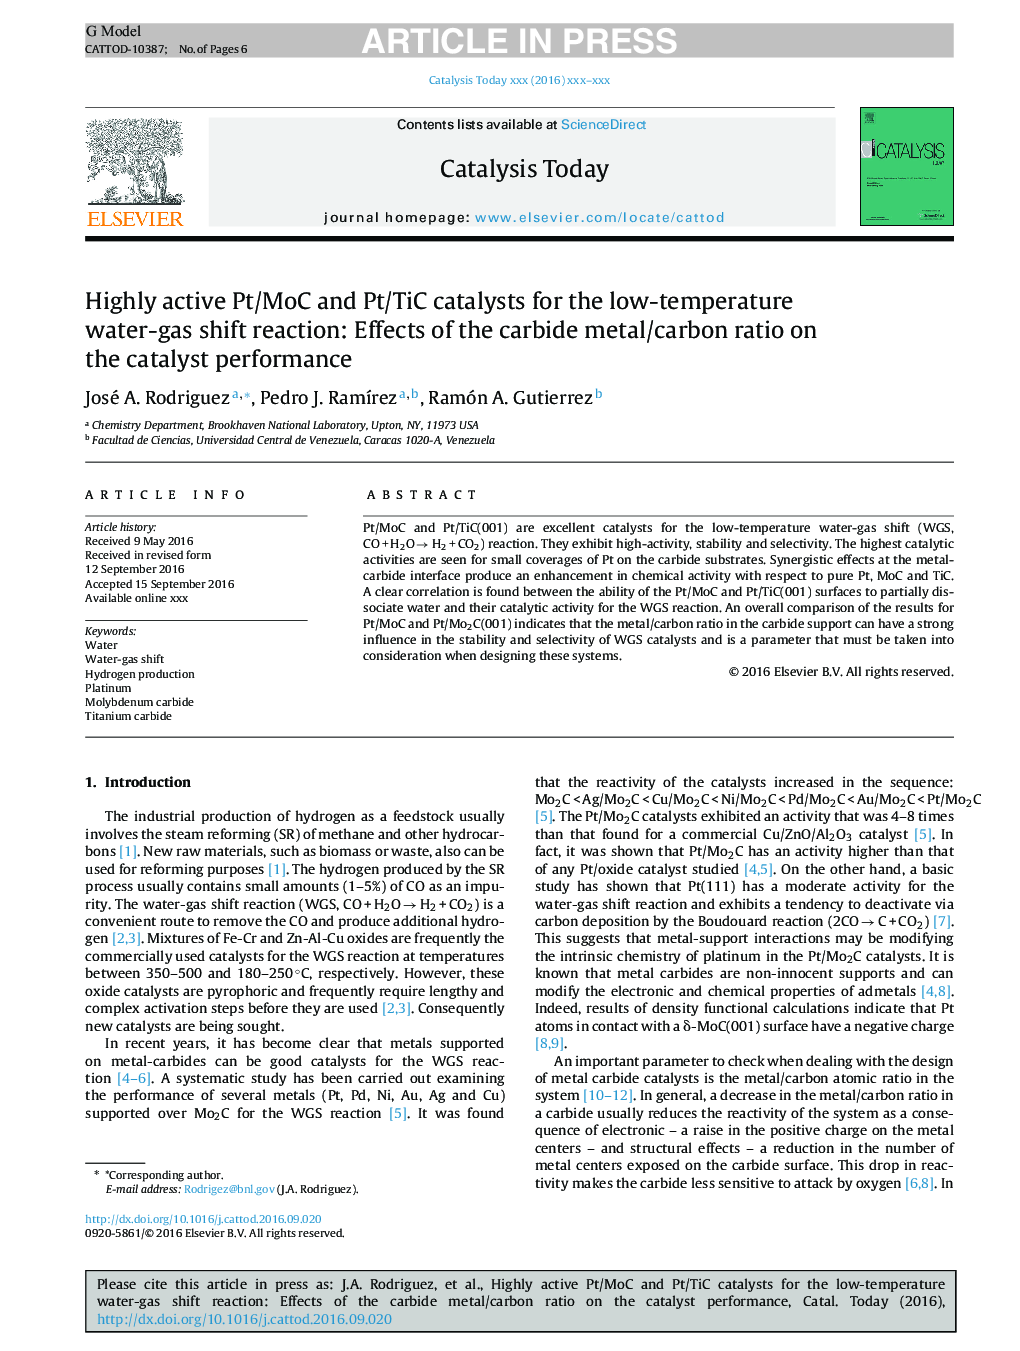 Highly active Pt/MoC and Pt/TiC catalysts for the low-temperature water-gas shift reaction: Effects of the carbide metal/carbon ratio on the catalyst performance